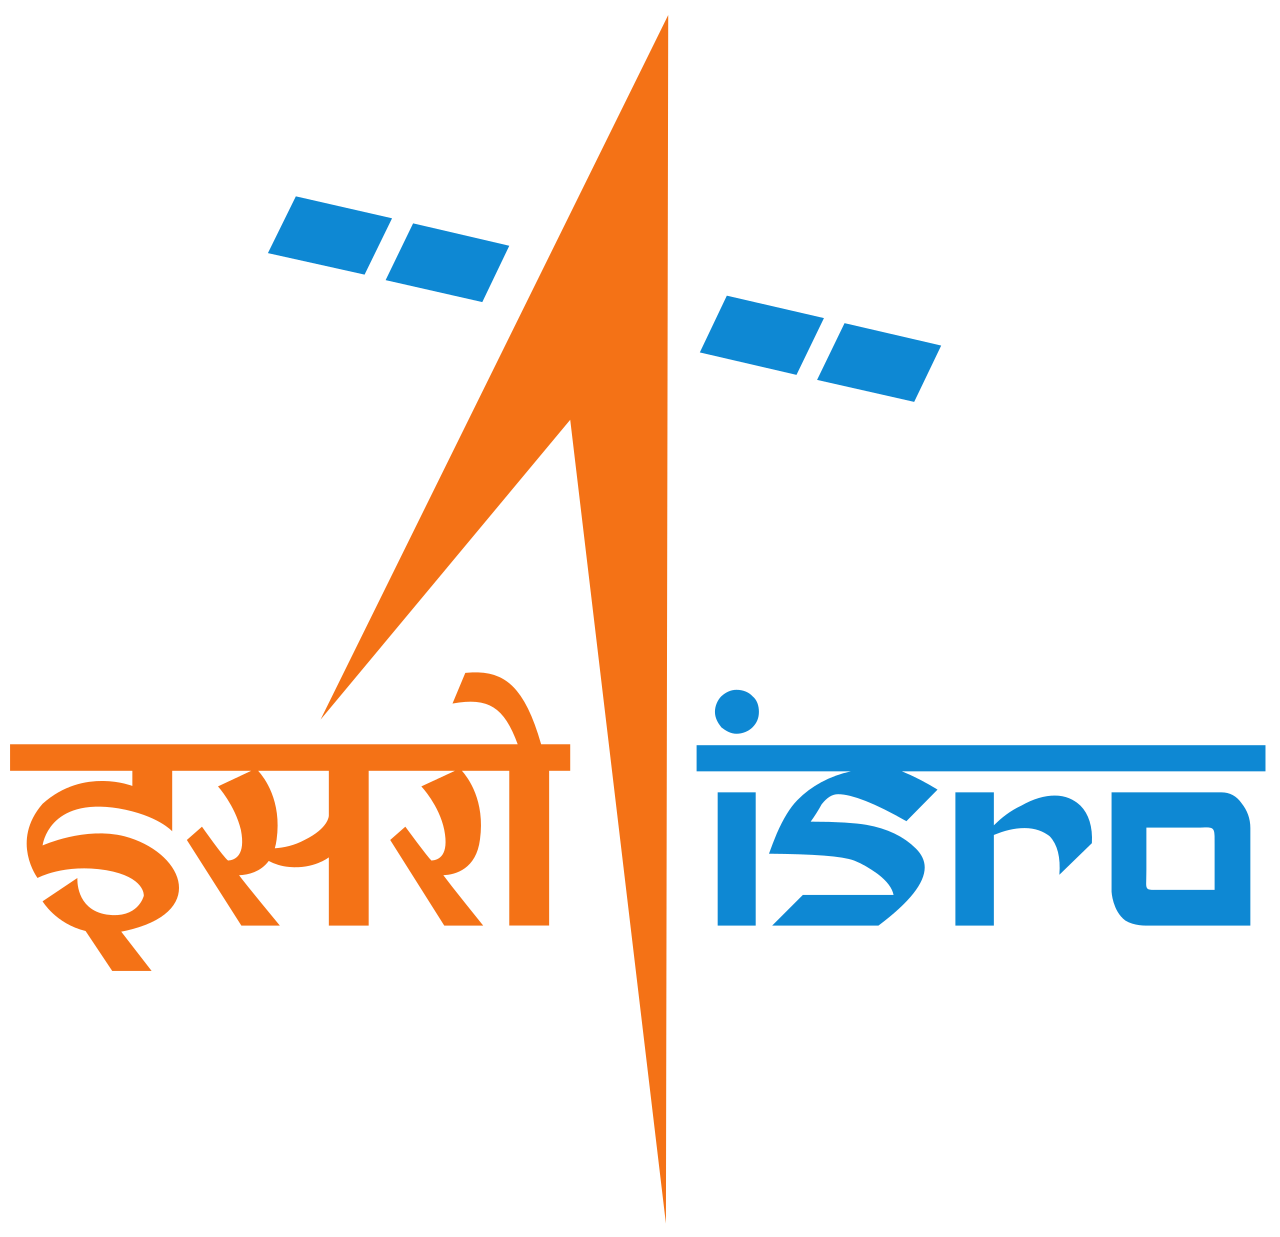 The logo of the Indian Space Research Organisation.